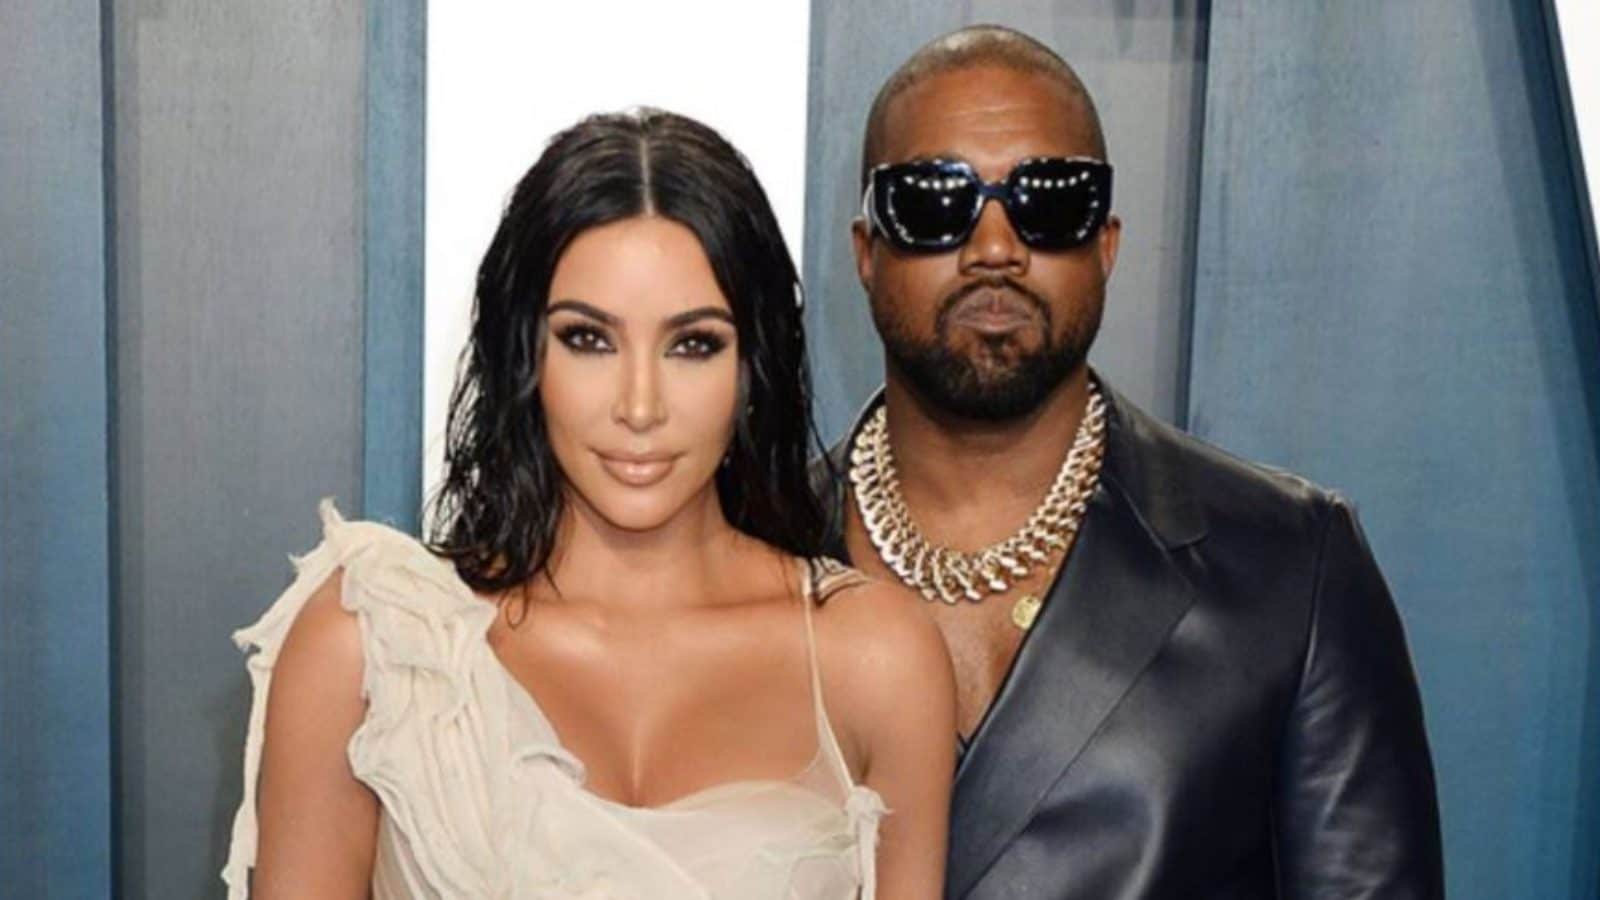 Kim Kardashian Admits Ex-husband Kanye West Taught Her To Be More Confident in Herself